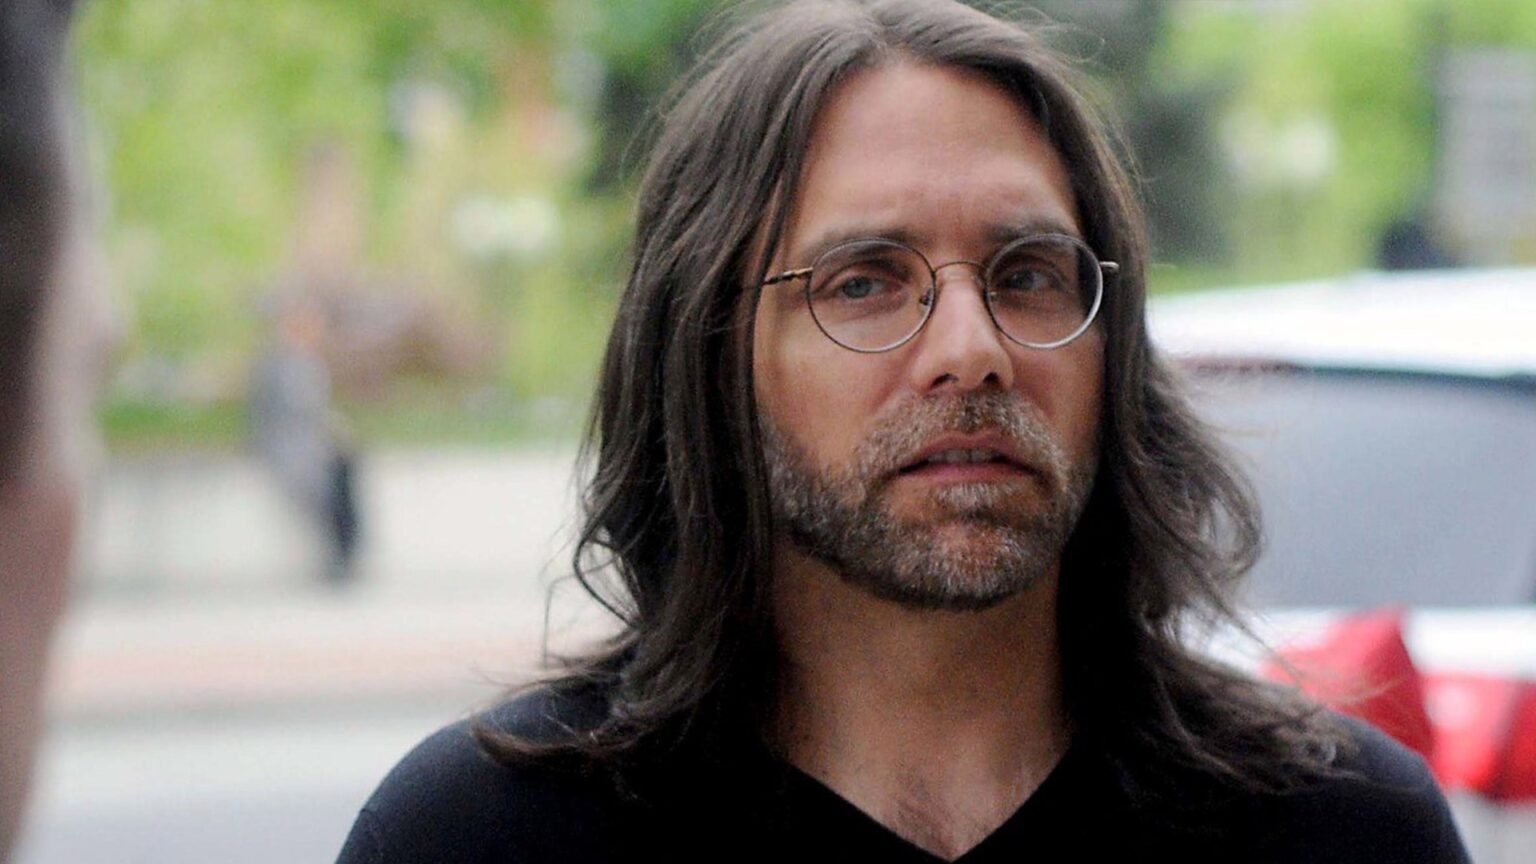 It's no longer a secret that the NXIVM "coaching organization" was actually a twisted sex cult, but are the founders finally being sent to prison?